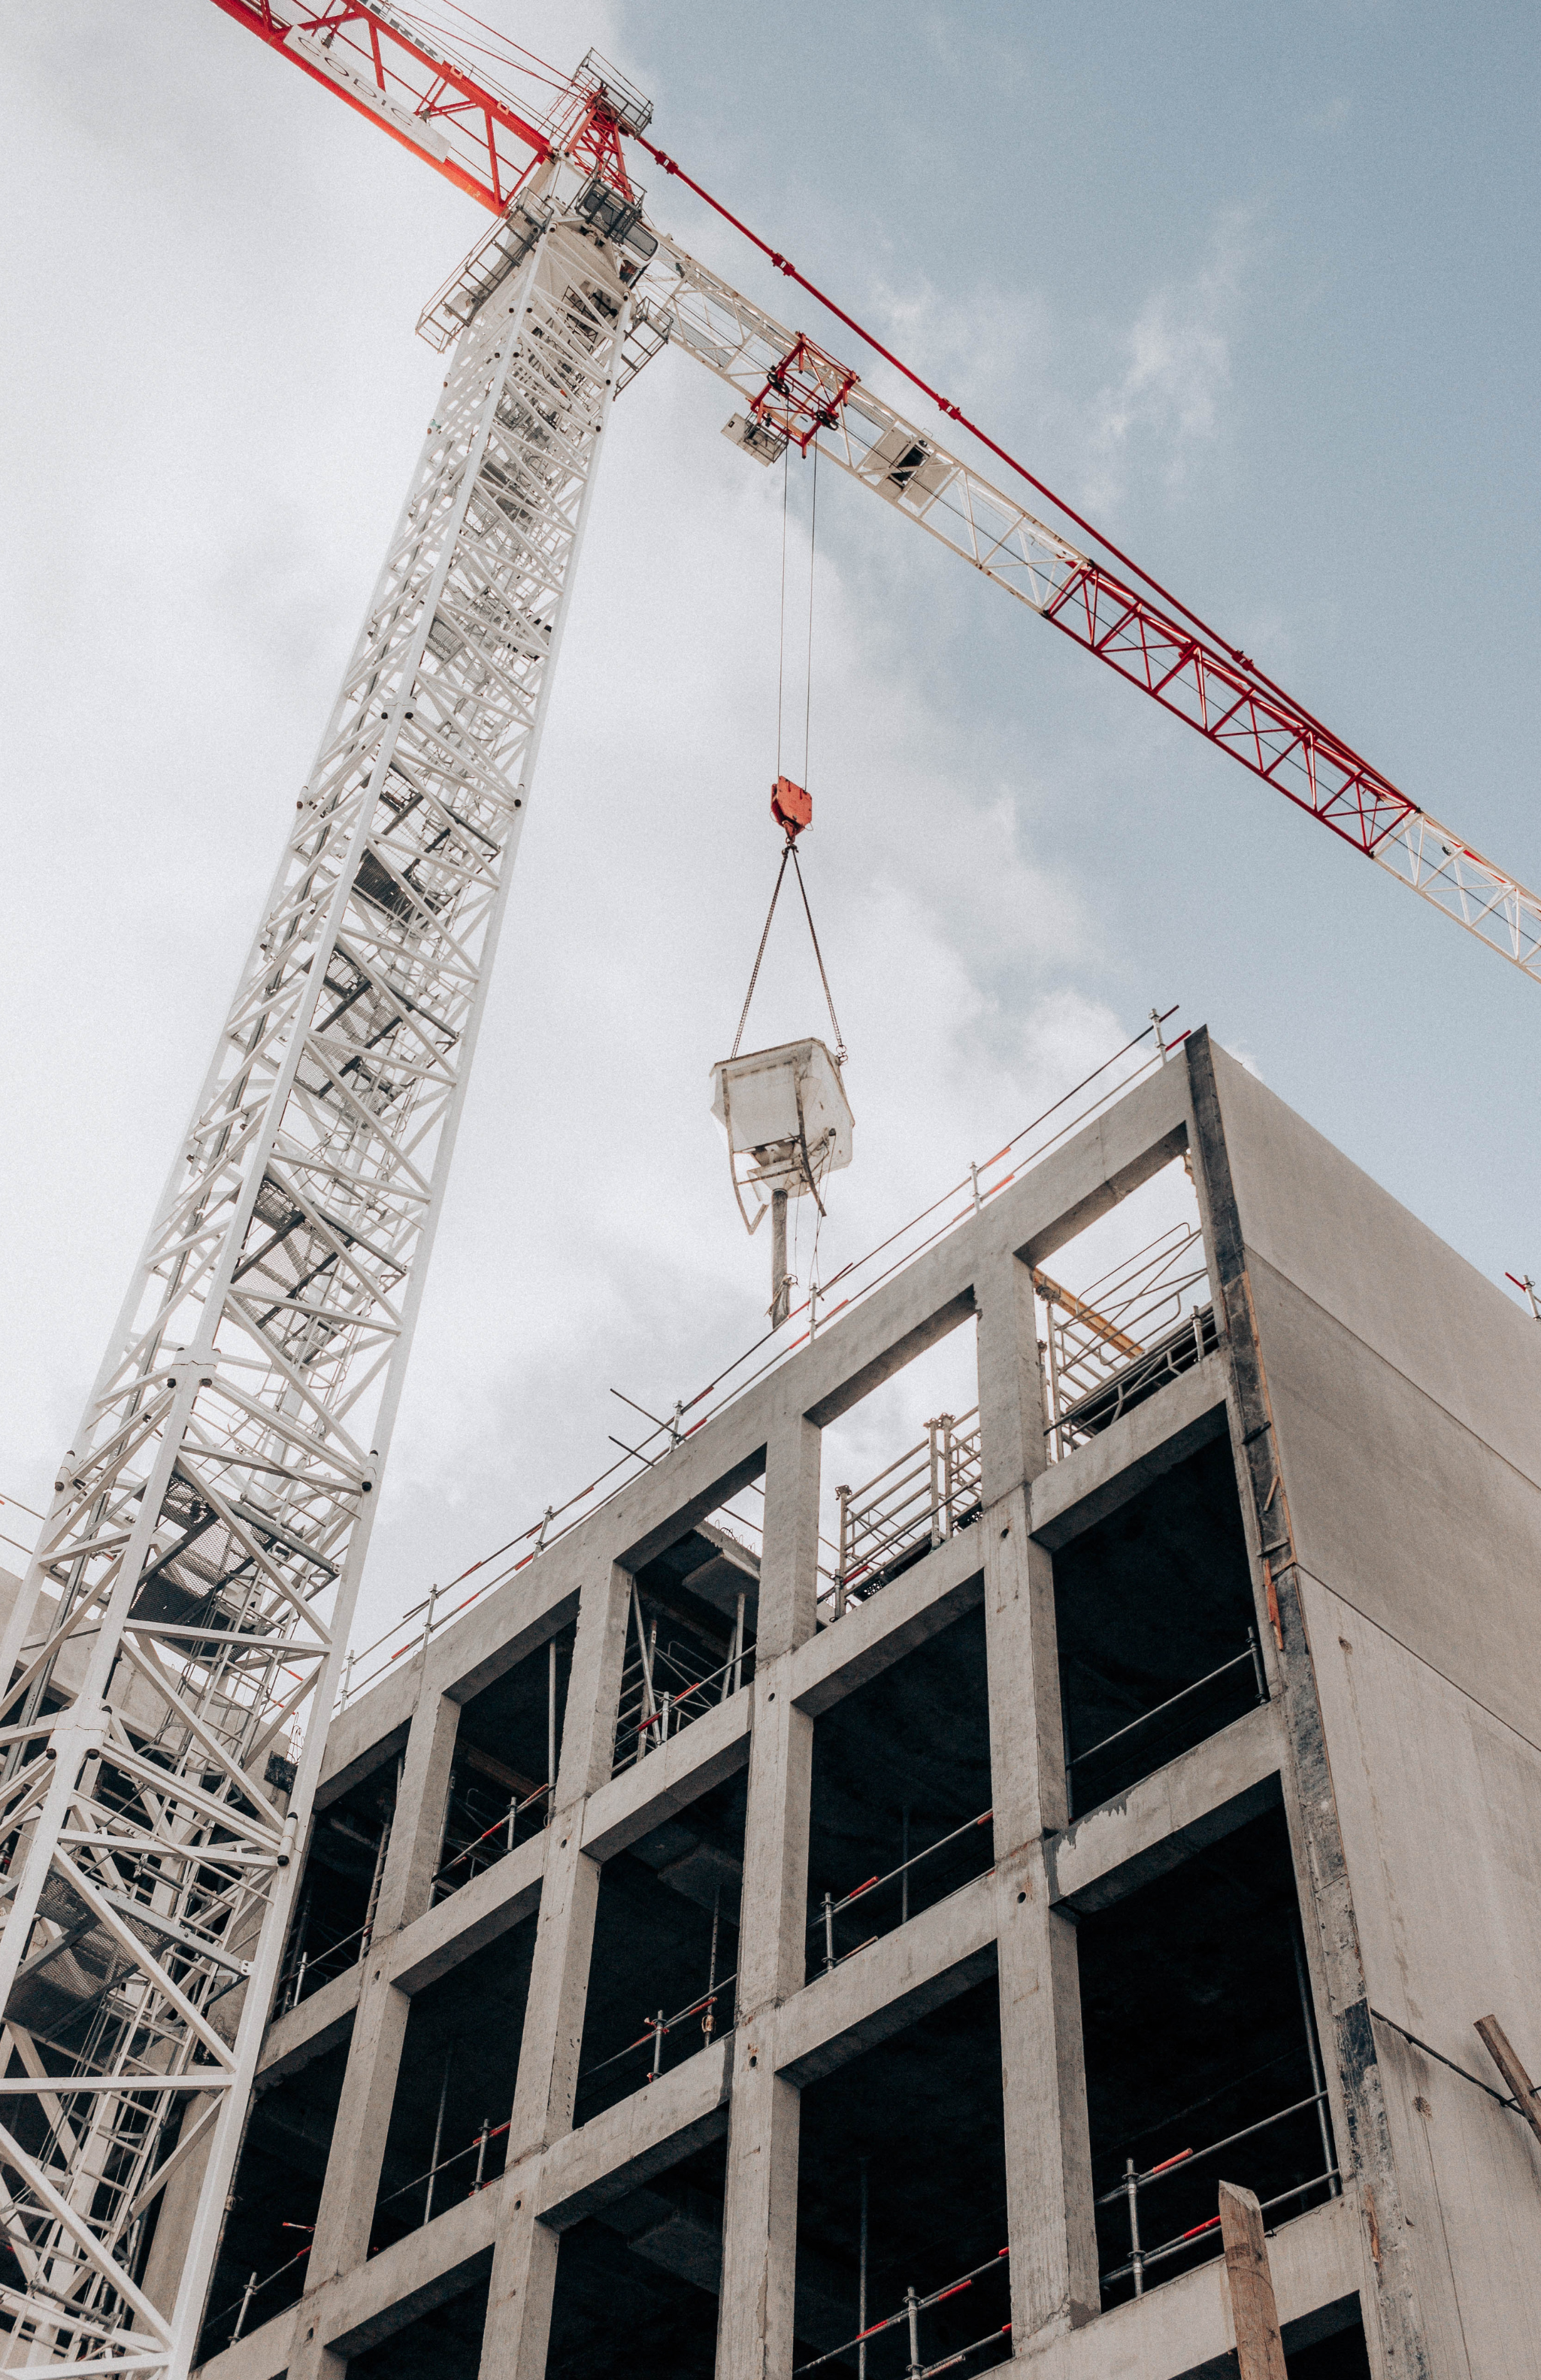 A crane lifting heavy materials during construction of a high-rise.